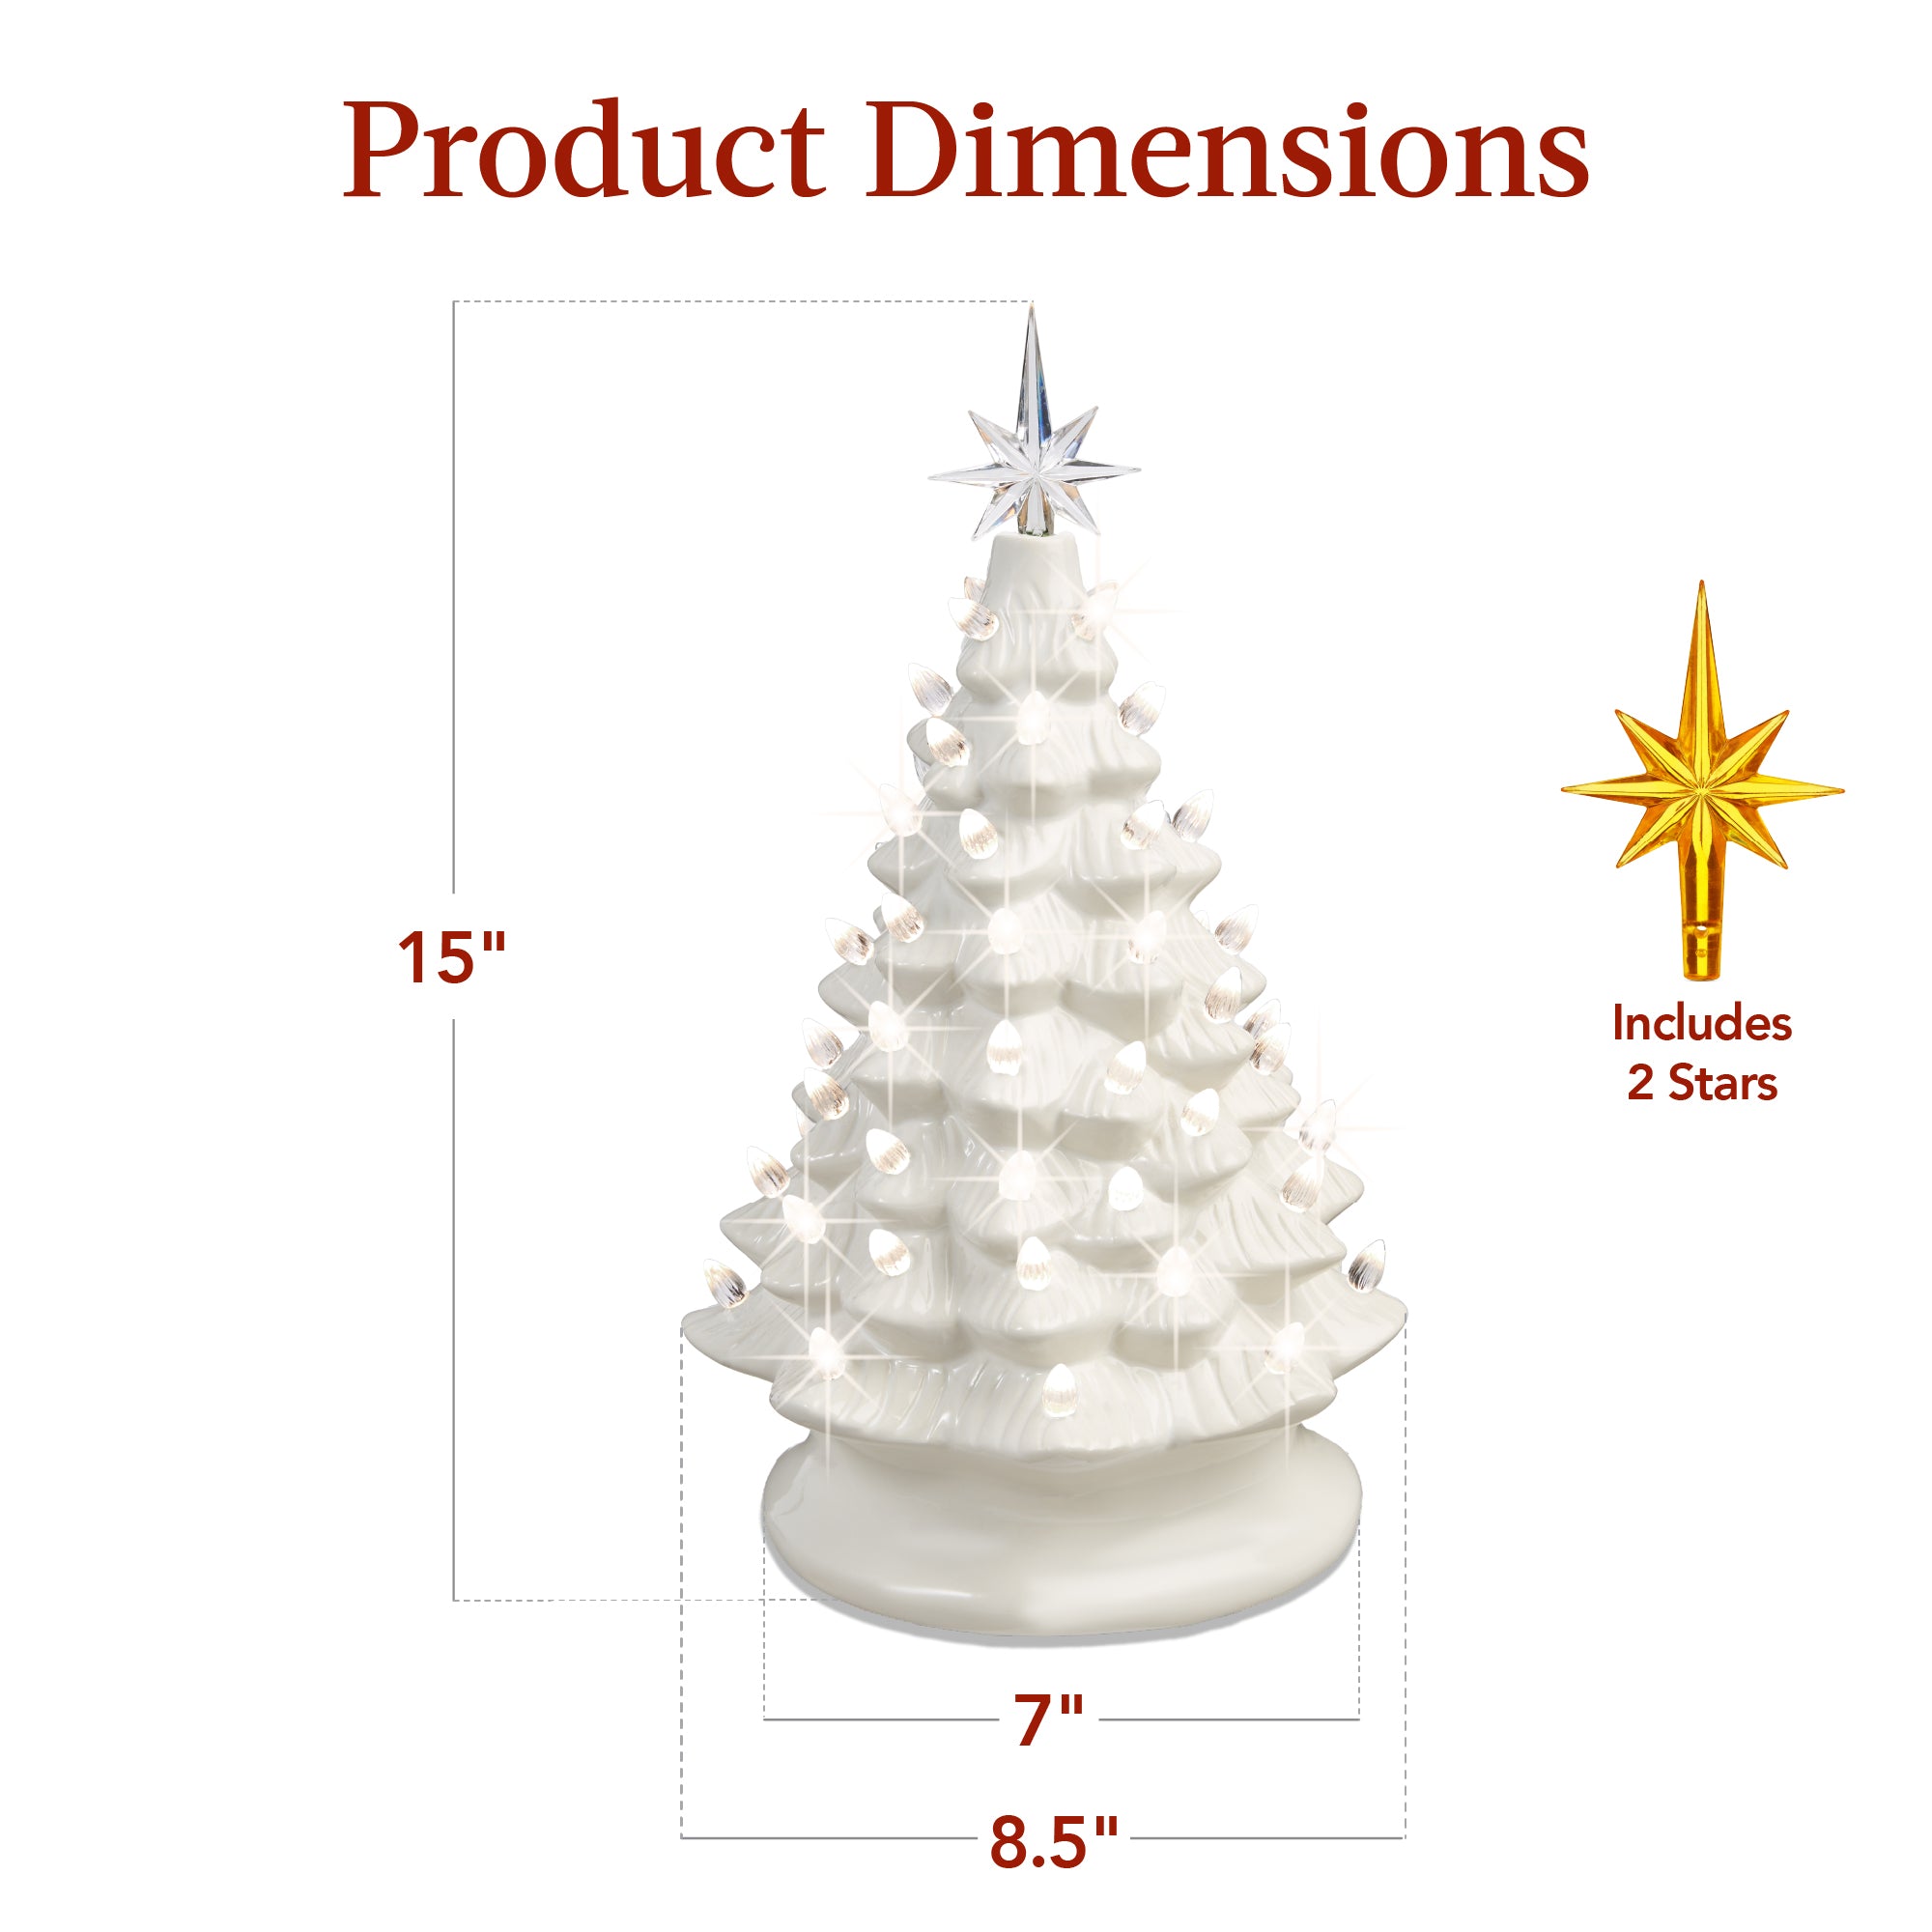 Best Choice Products 15in Pre-Lit Hand-Painted Ceramic Tabletop Christmas Tree w/ 64 Lights - Green